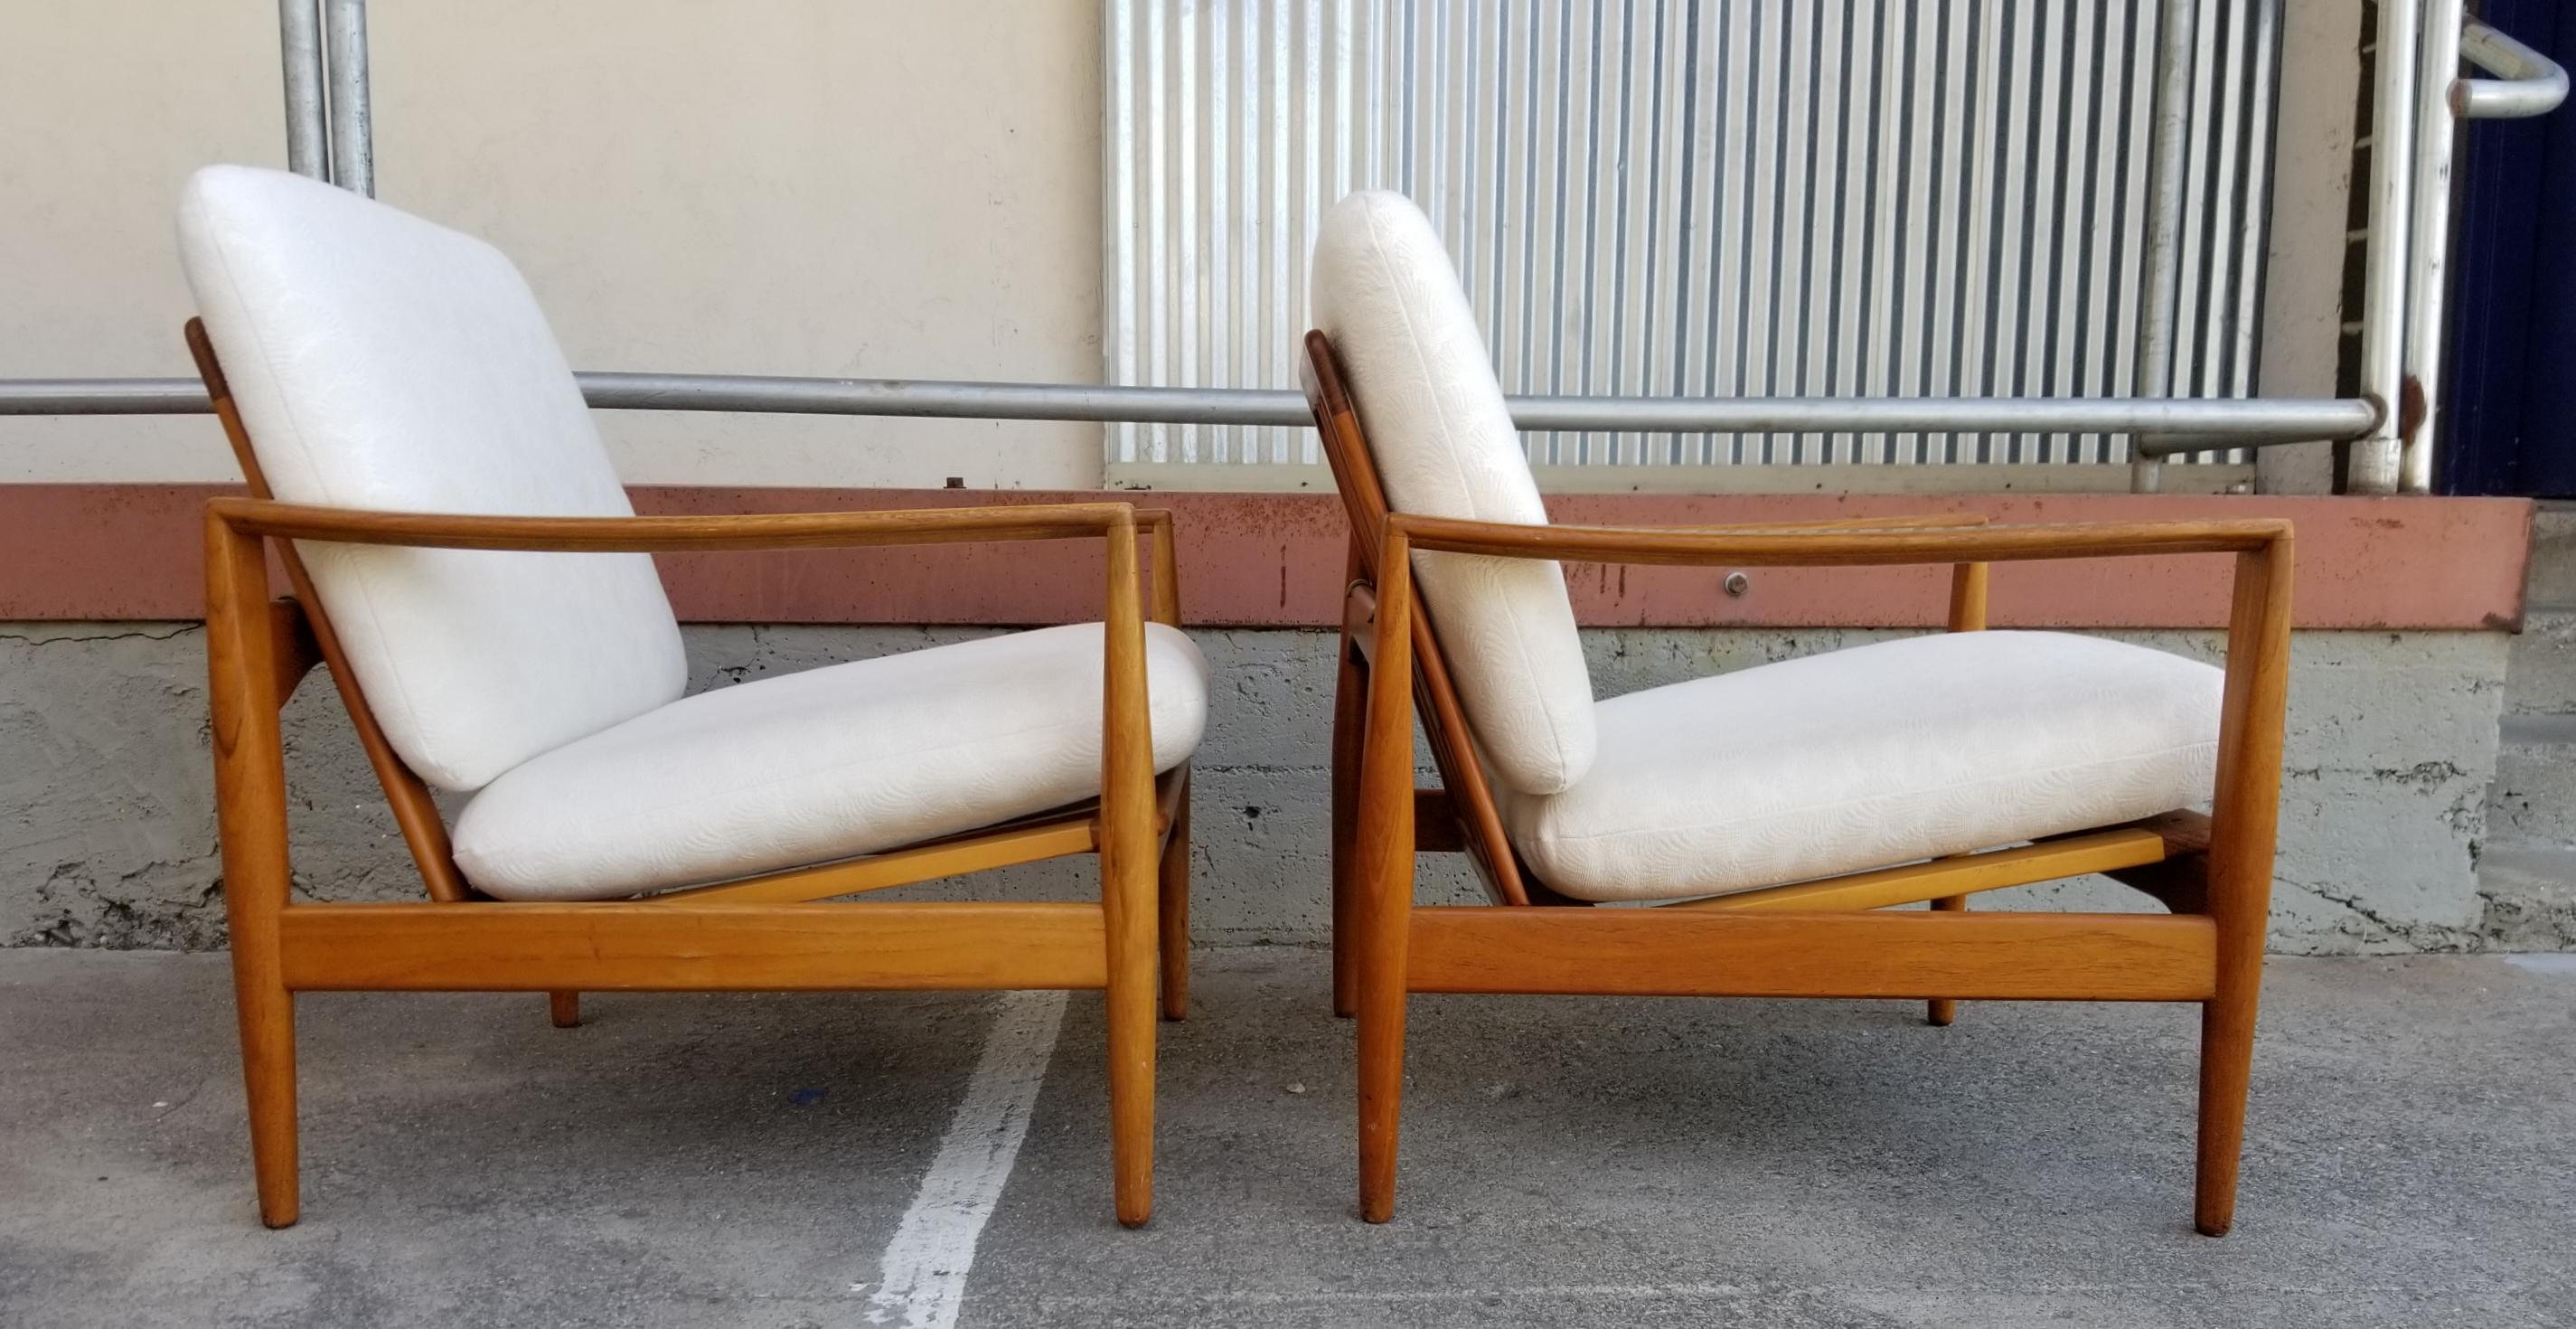 A pair of teak lounge chairs designed by Ib Kofod-Larsen and sold through notable retailer Illum Bologhus, Copenhagen. Crafted in solid teak with unusual finger-joint detail at front of arms. Retaining Illum Bologhus metal label on each chair.